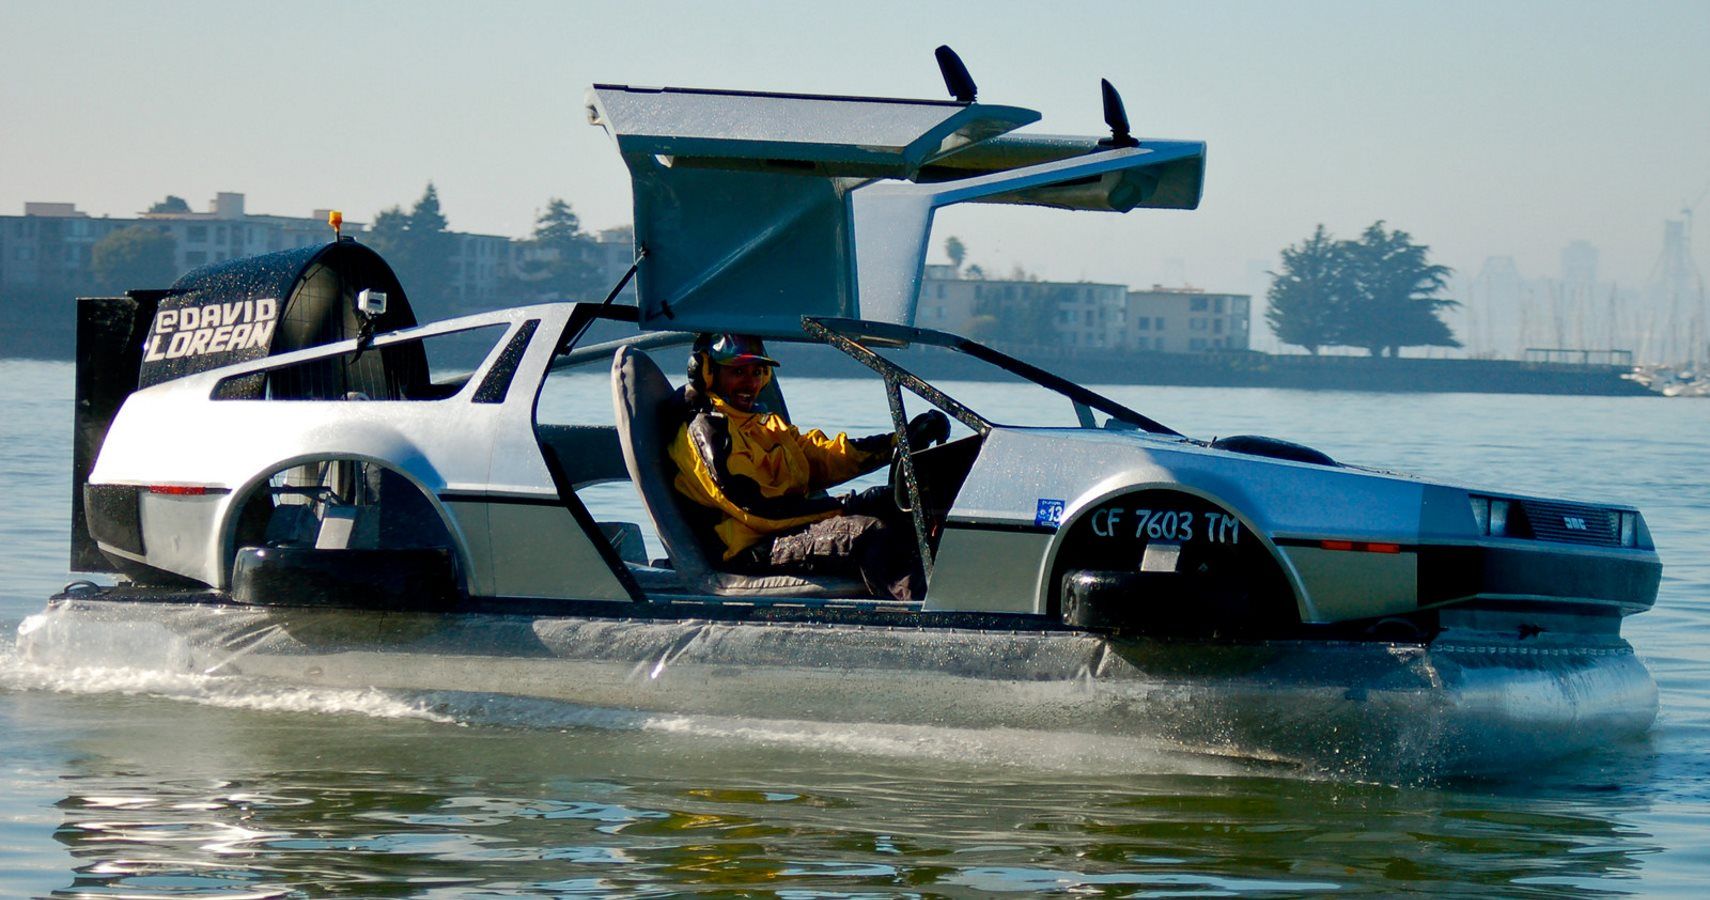 DeLorean Hovercraft Stars In Exciting Trick Video